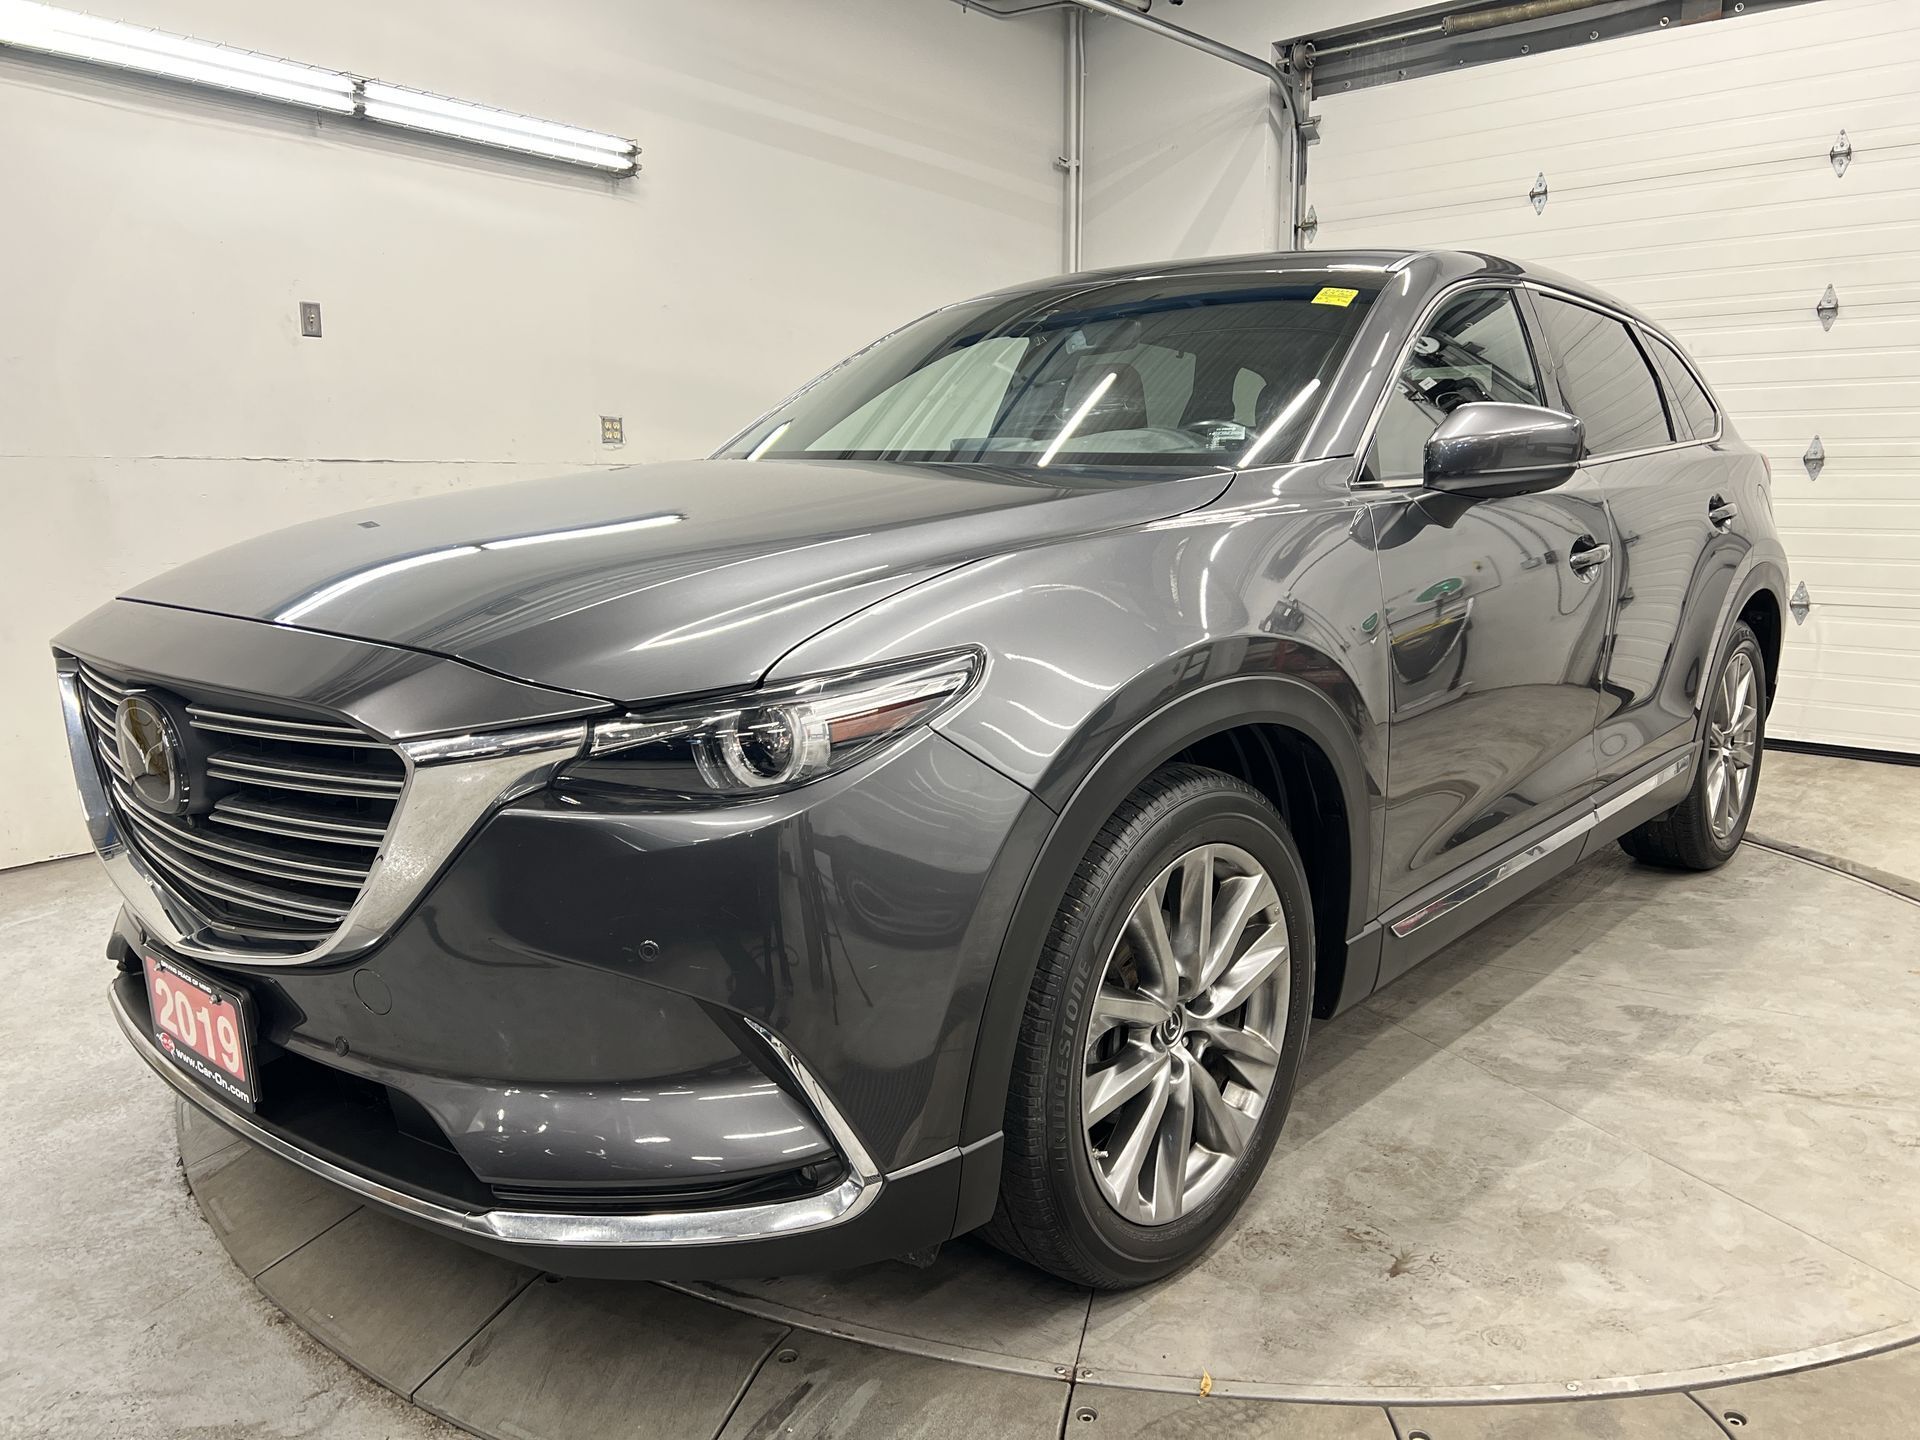 2019 Mazda CX-9 SIGNATURE AWD | NAPPA LEATHER | 360 CAM | LOW KMS!